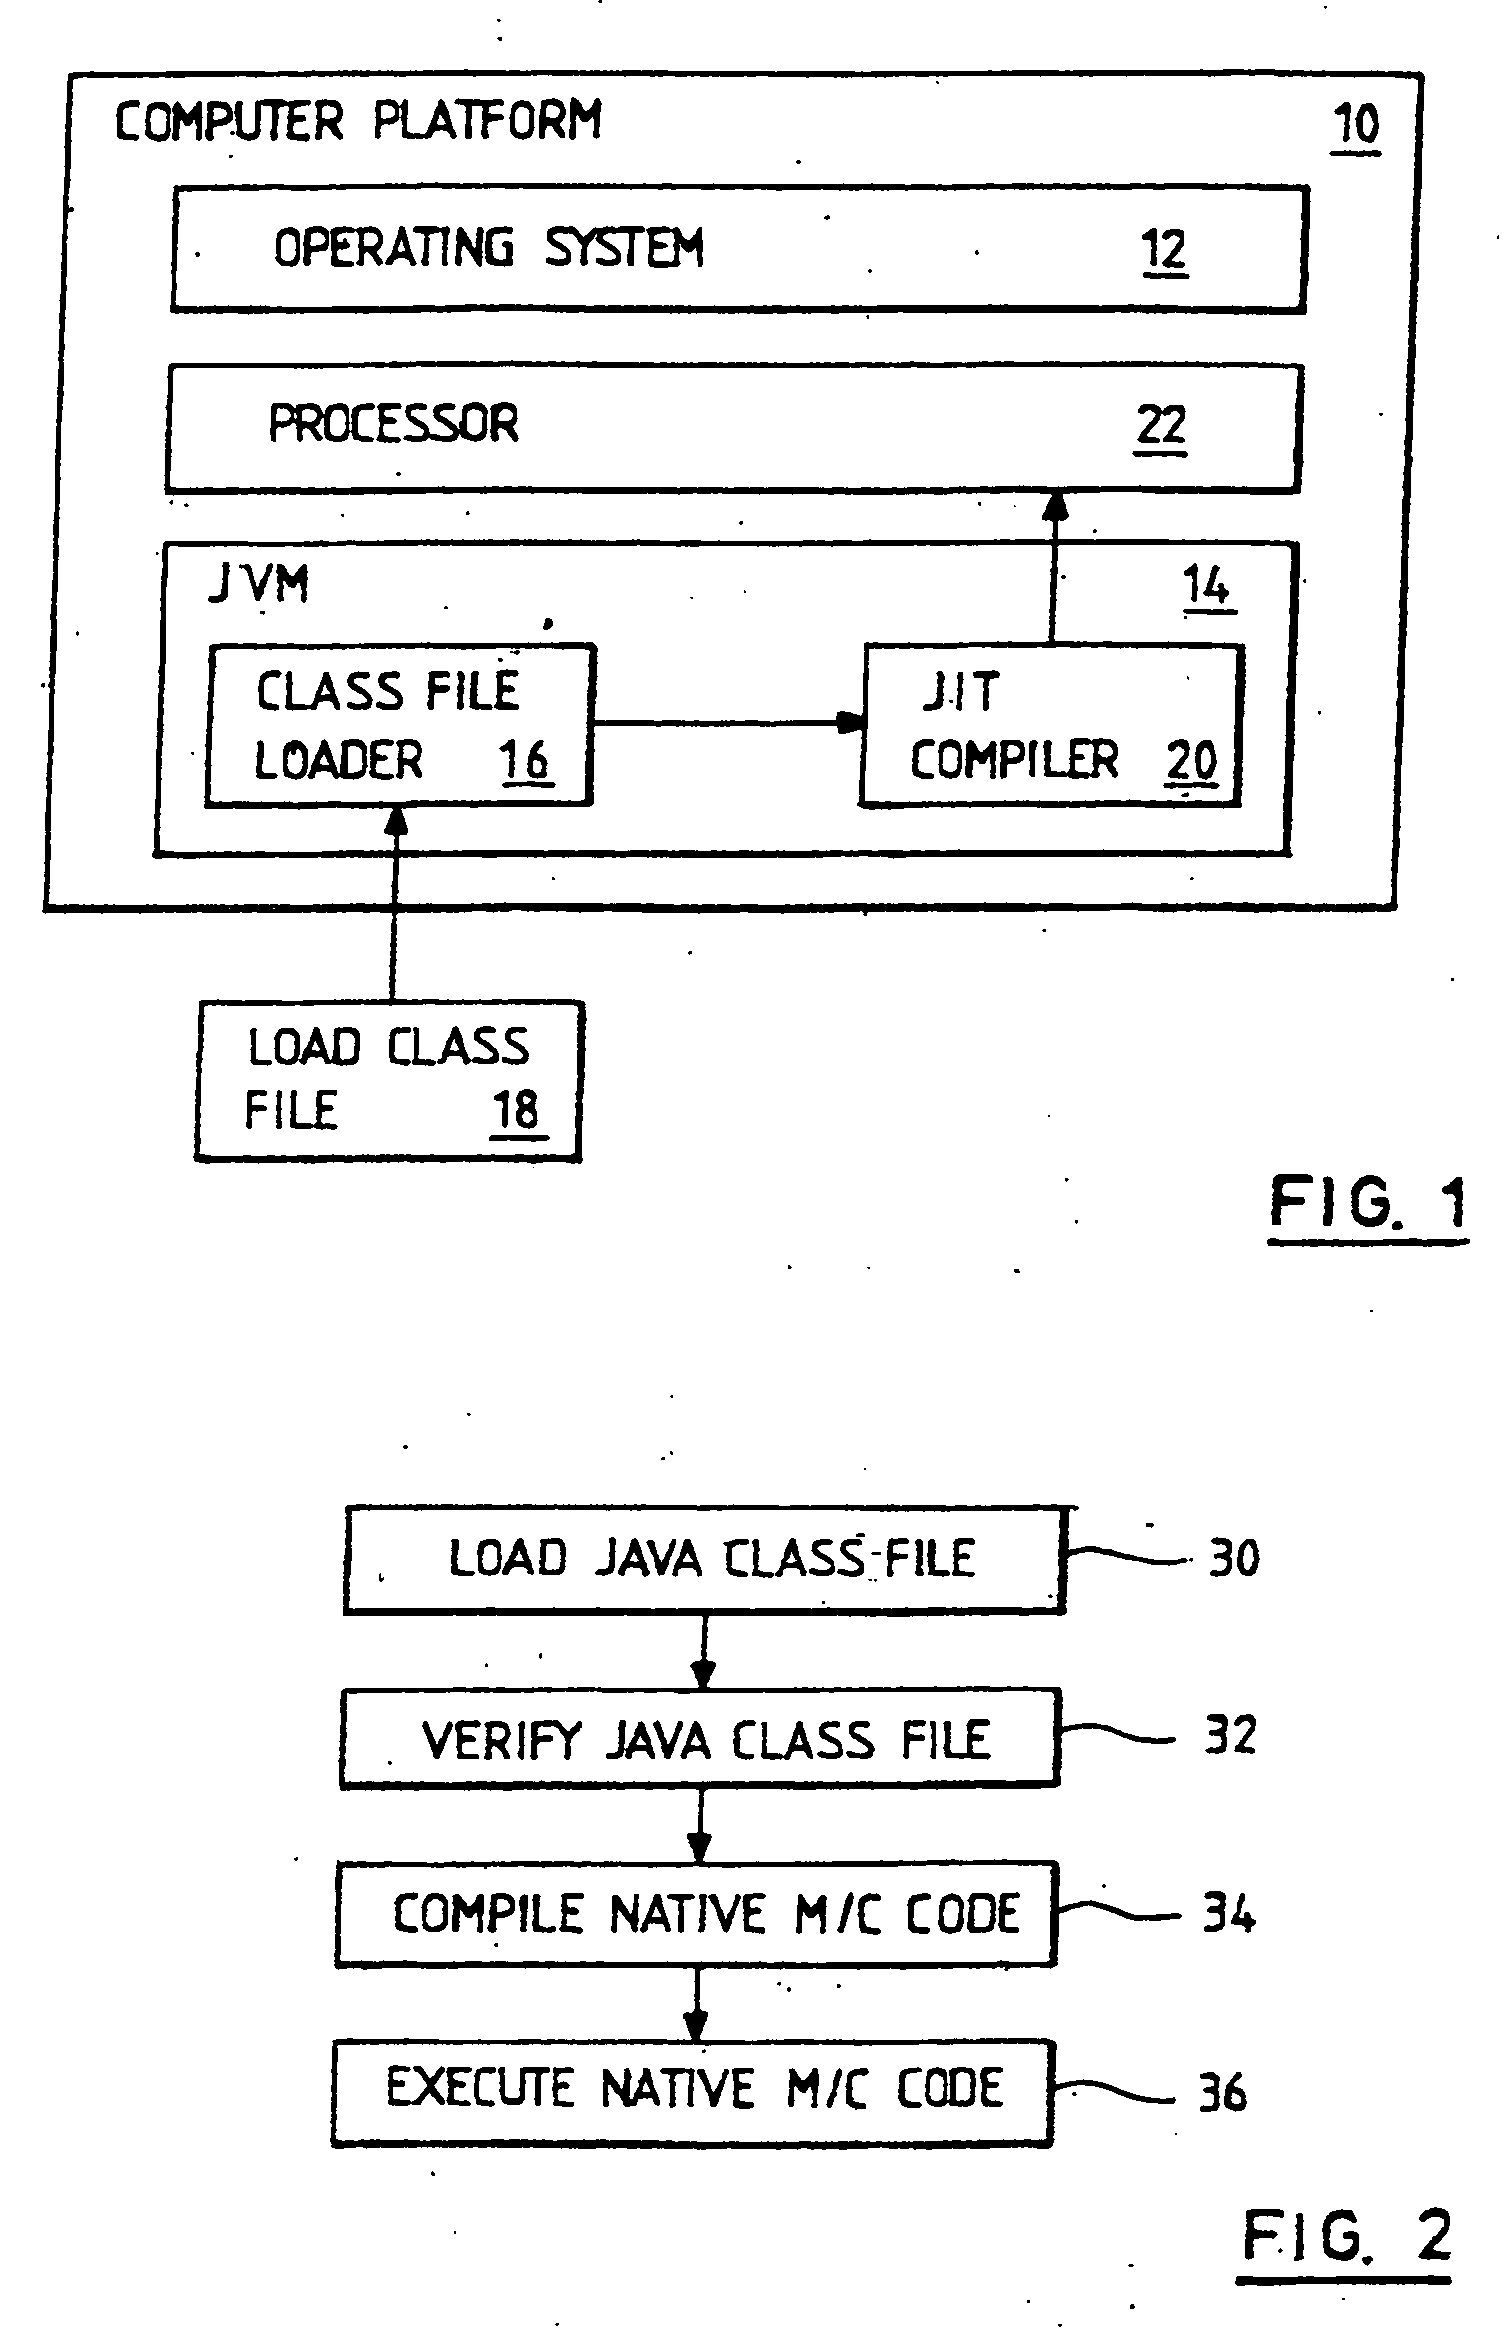 Method and apparatus for activating/deactivating run-time determined software routines in Java compiled bytecode applications